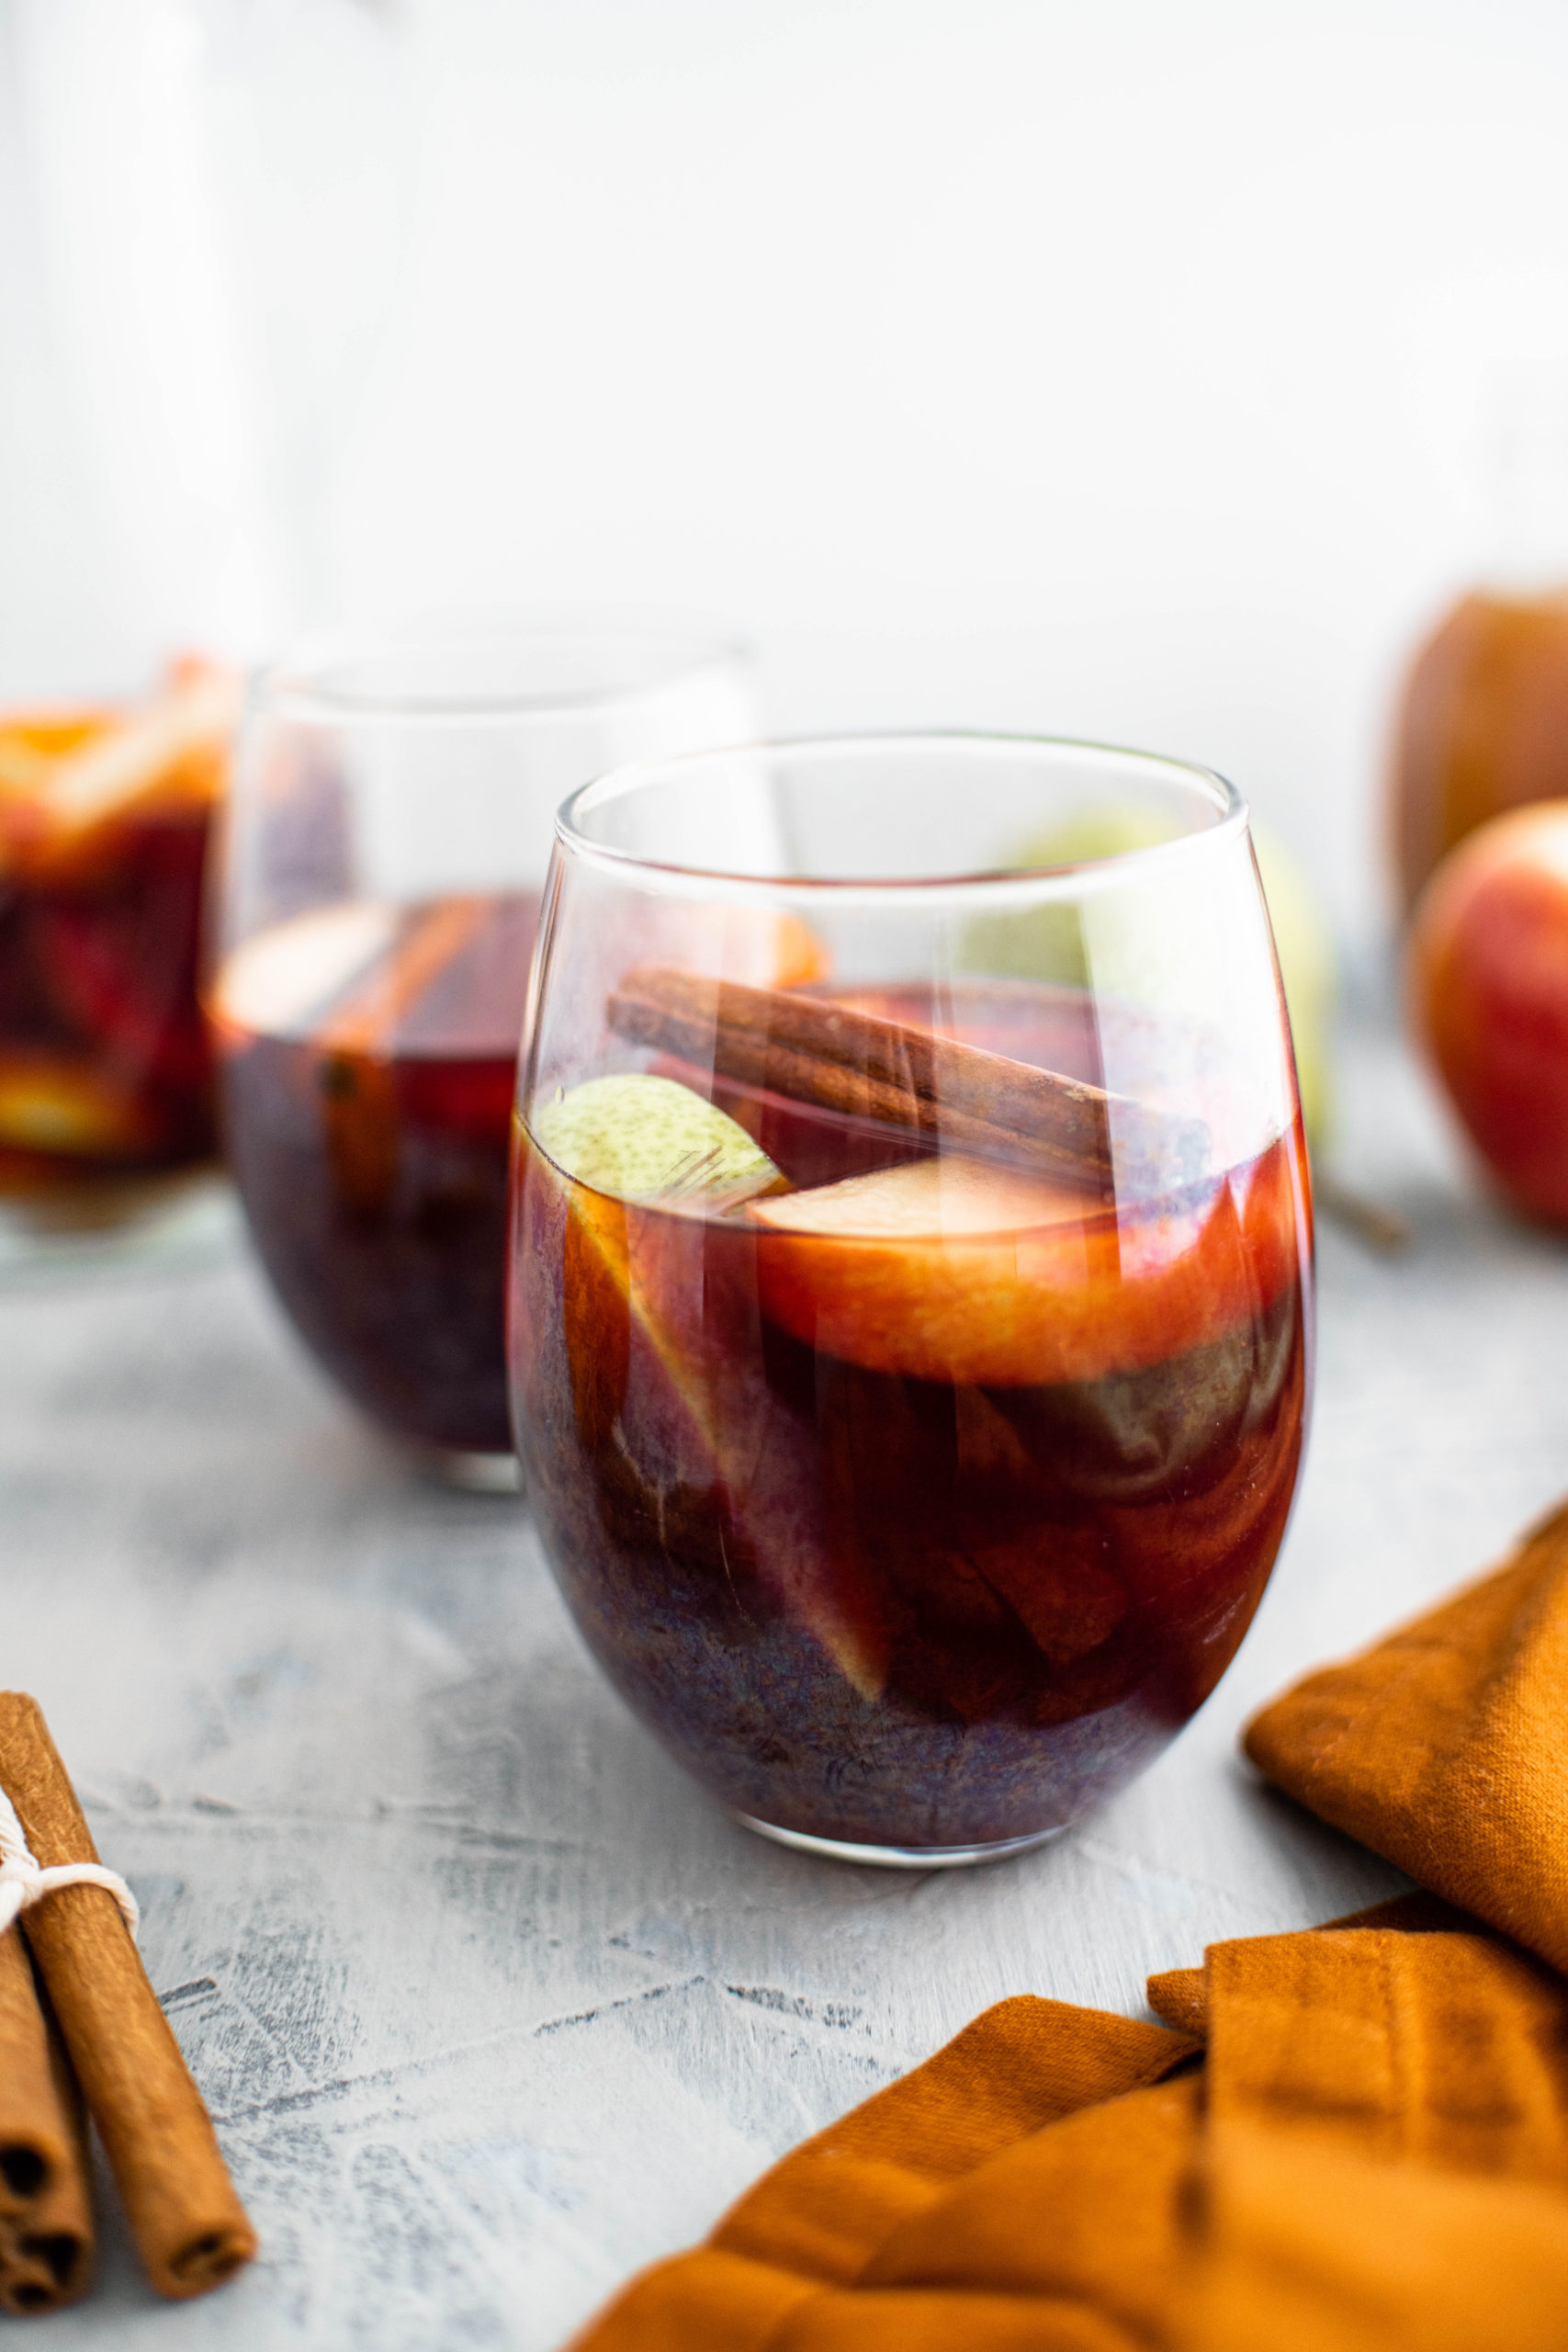 Two glasses of fall sangria with sliced apples, sliced pears, sliced oranges and a cinnamon stick floating in it. Pitcher of sangria in back left corner.